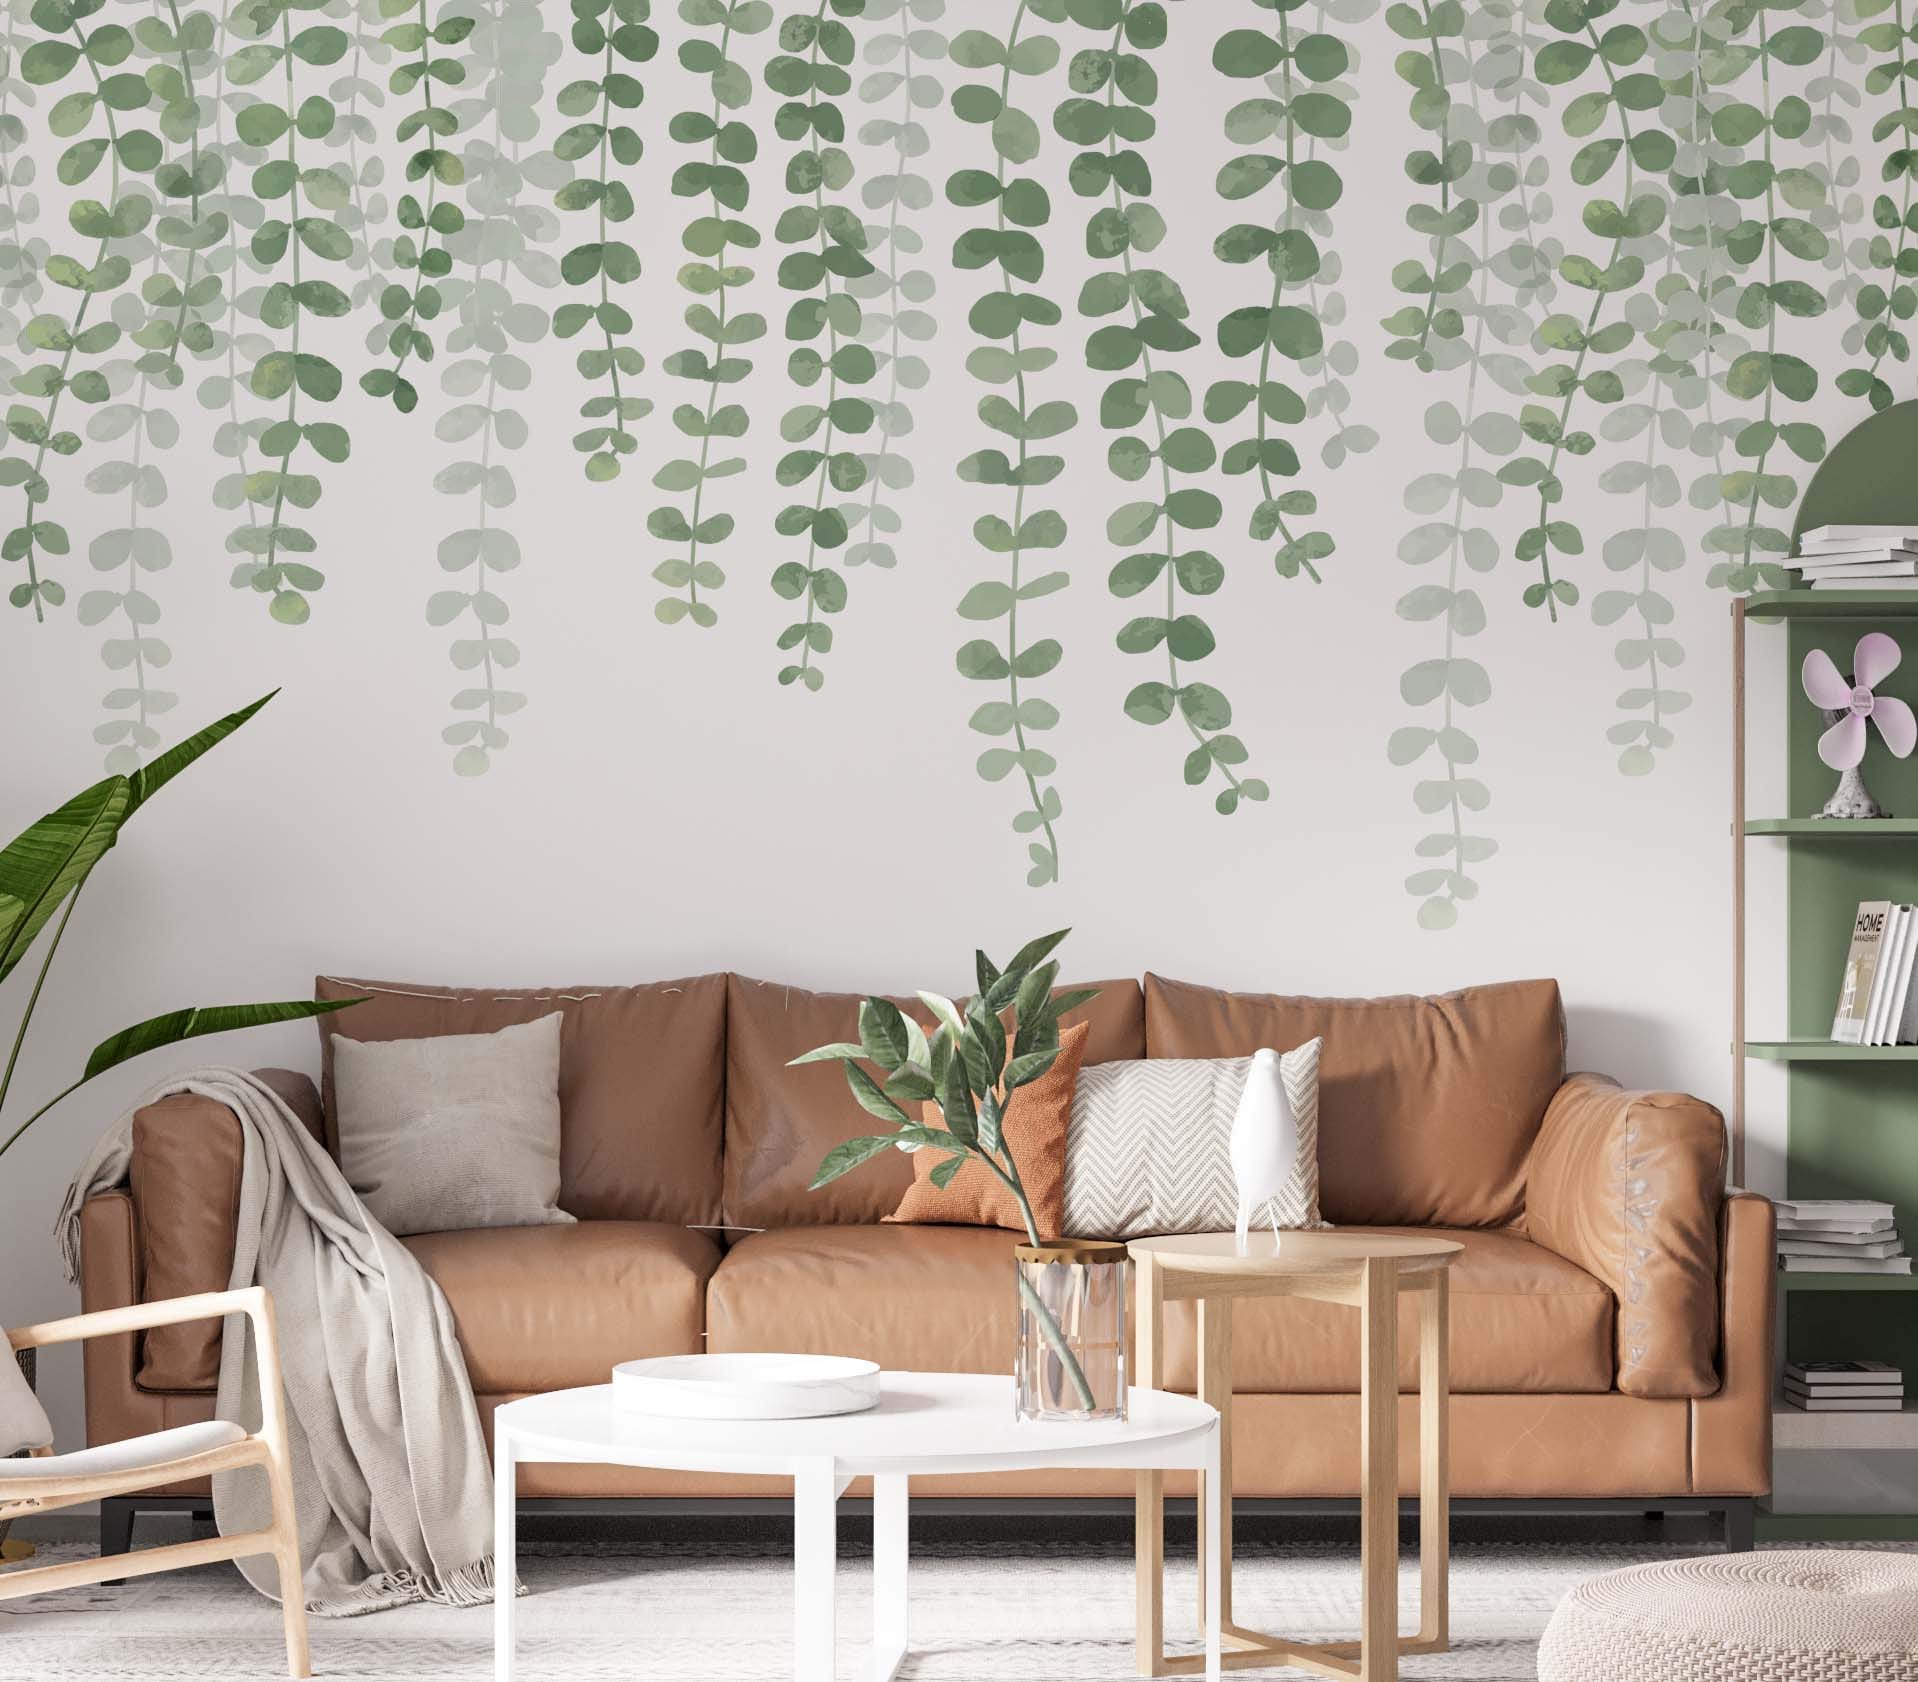 Hanging Eucalyptus Greenery Wall Stickers Vines Leaves Decals, LF310 –  StickersForLife